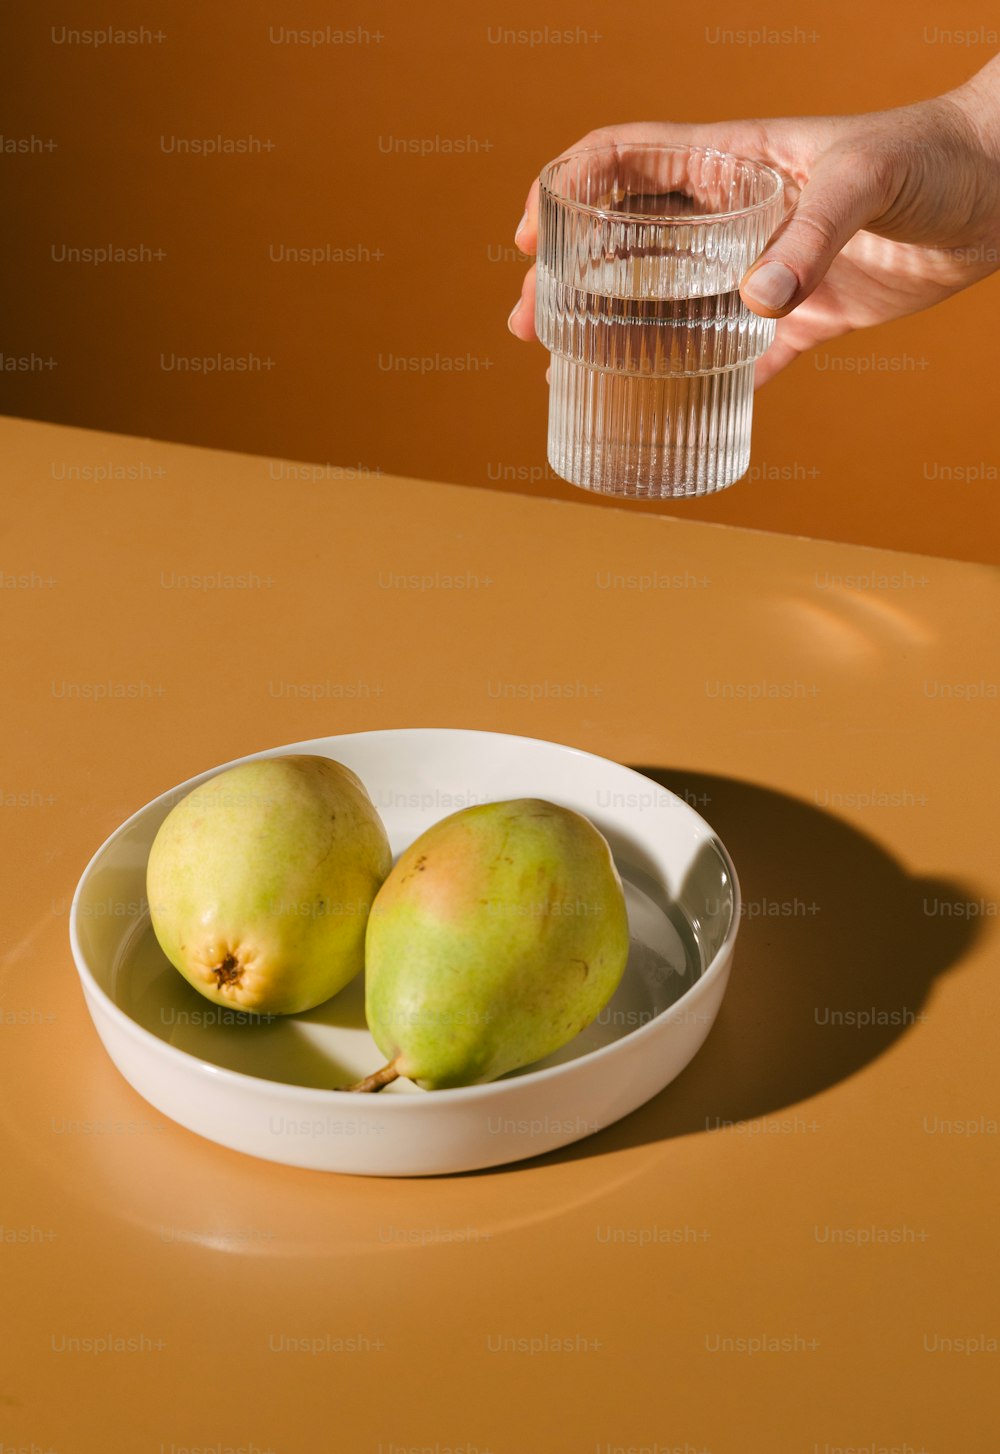 a bowl of fruit on a table with a glass of water